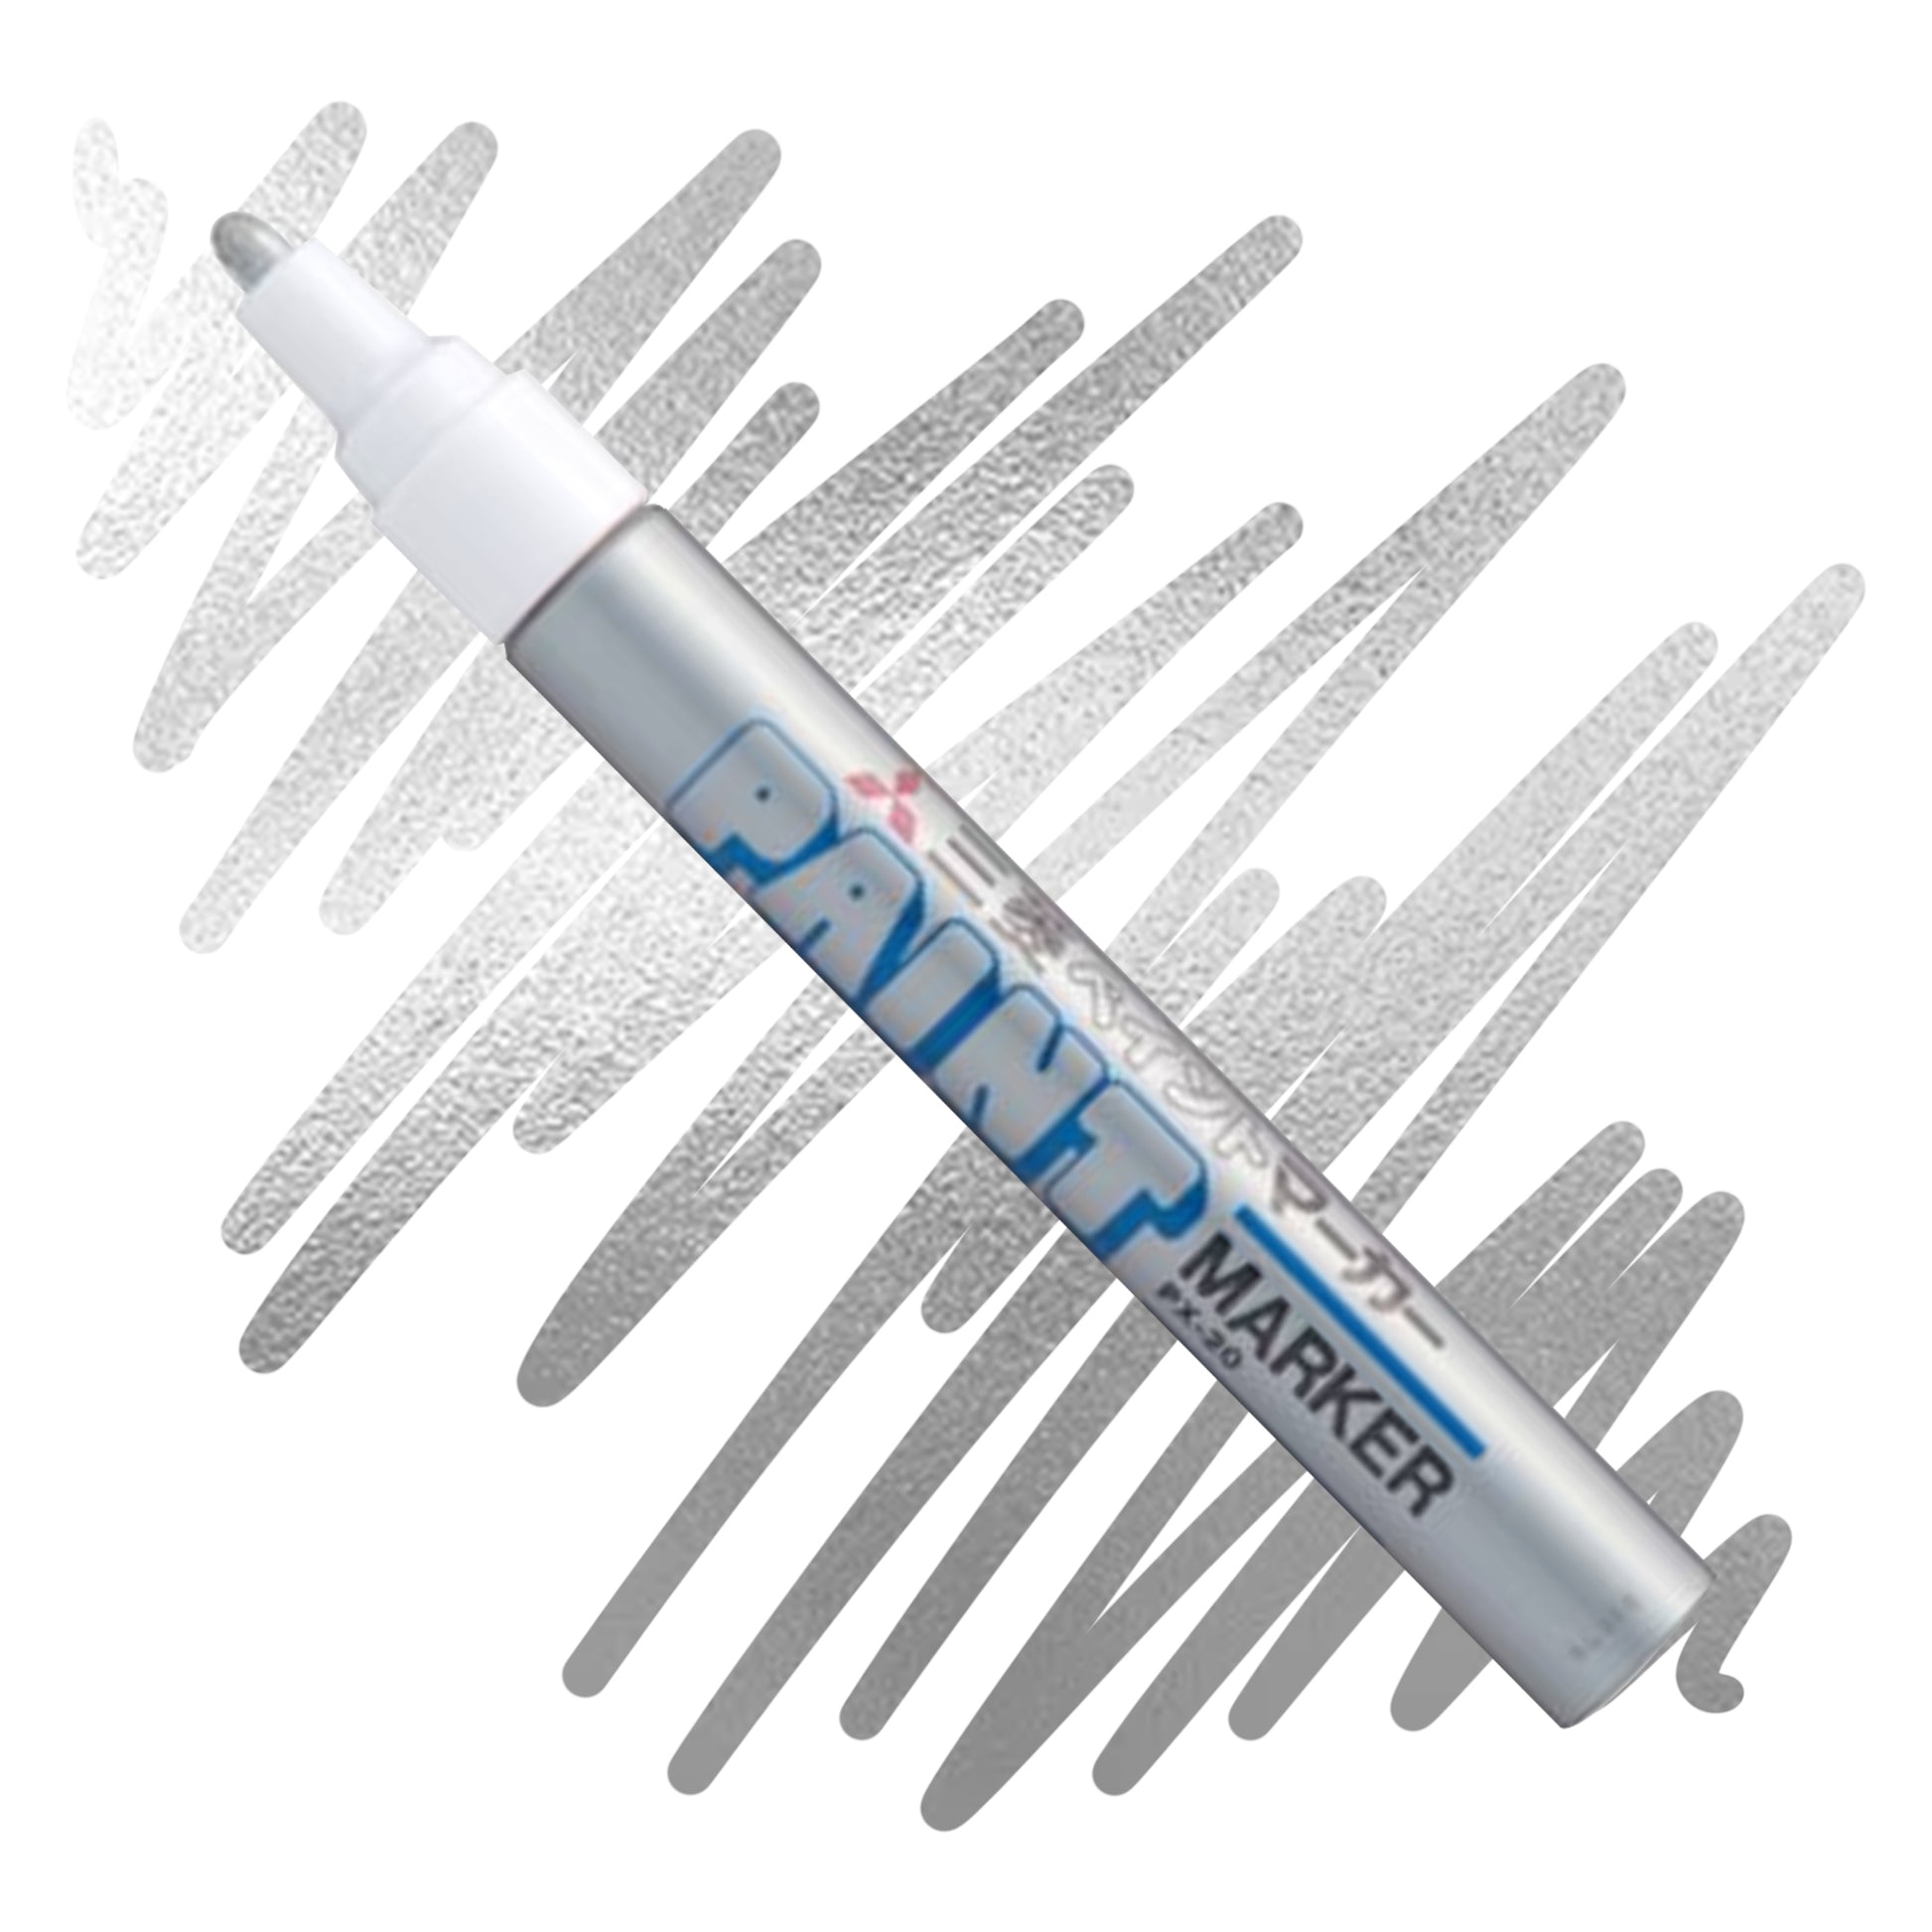 A white marker angled diagonally, the tip of the marker and the nib are colored silver. On the marker body the label reads "Uni PAINT Maker". Behind the marker is a color swatch of a squiggly line in silver.